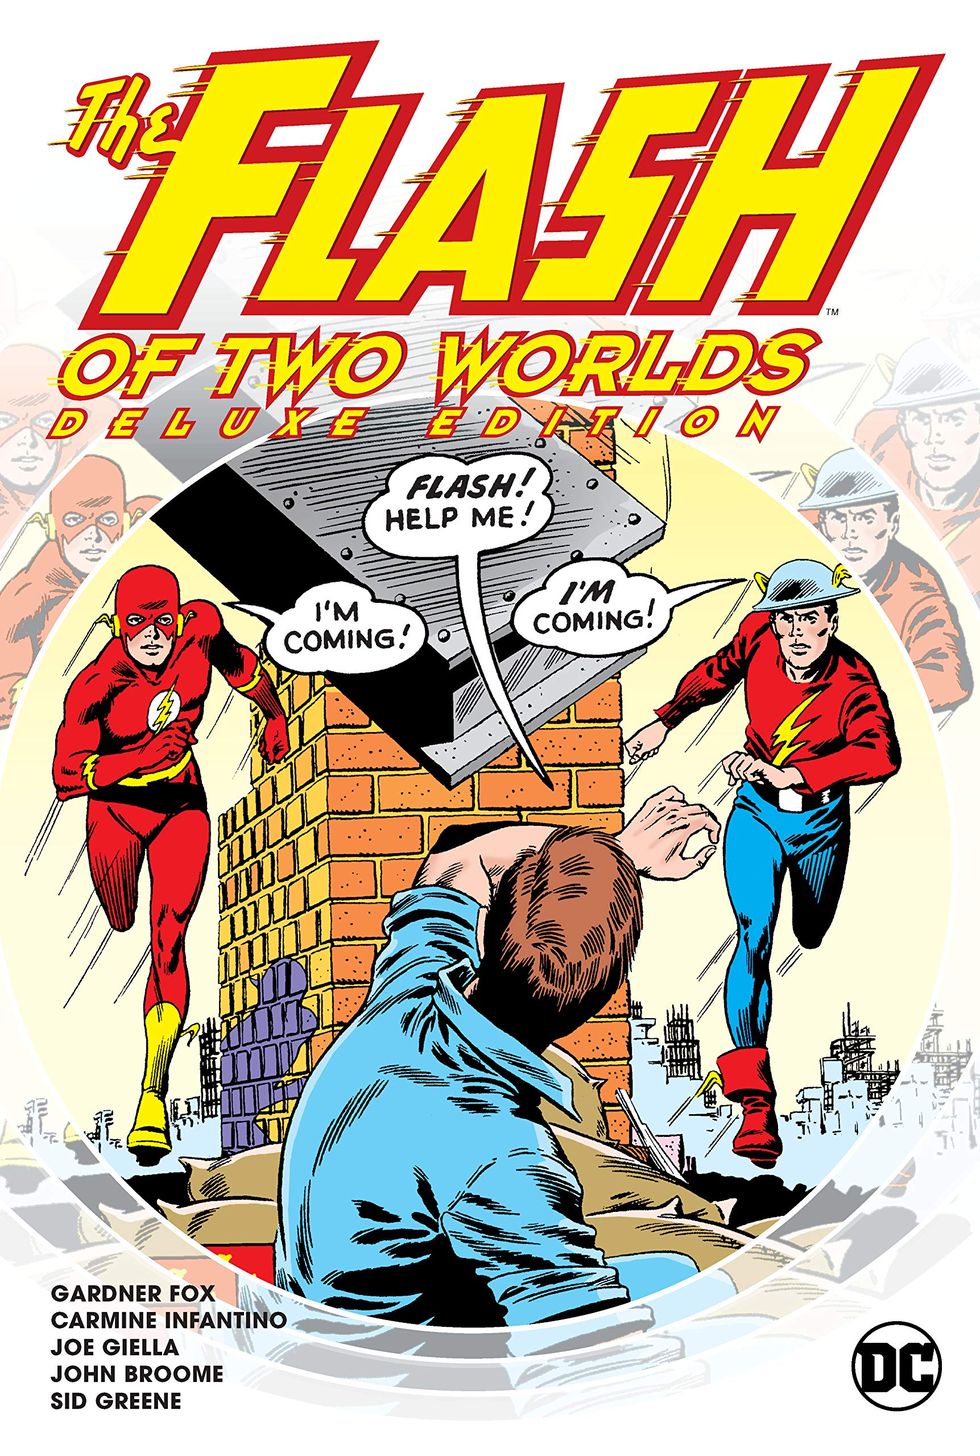 “The Flash of Two Worlds” (The Flash #123, 1961)